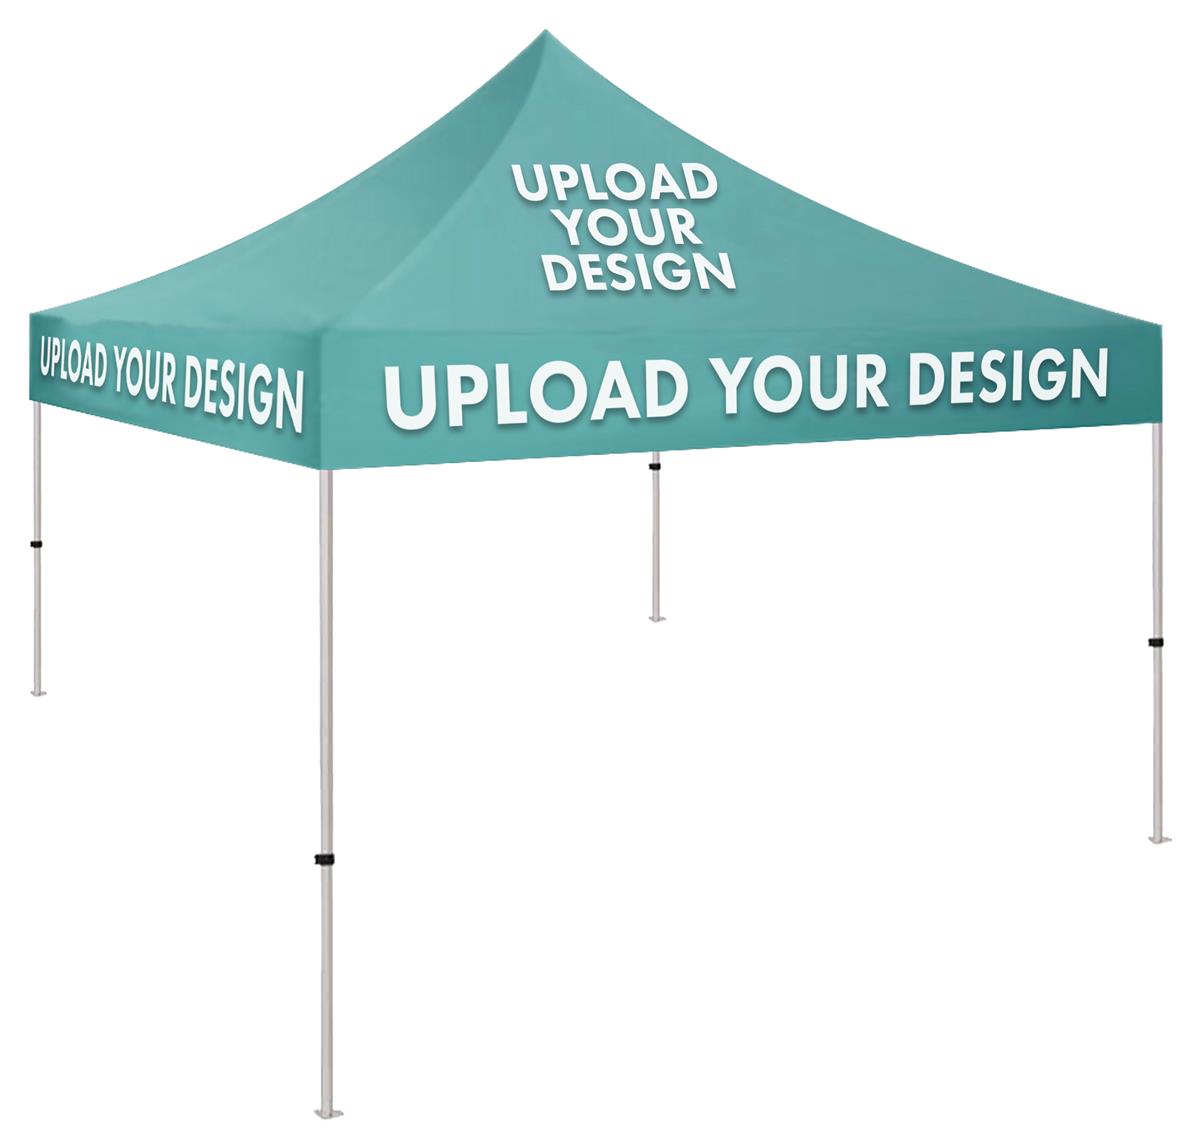 Branded pop up canopy with full color printing